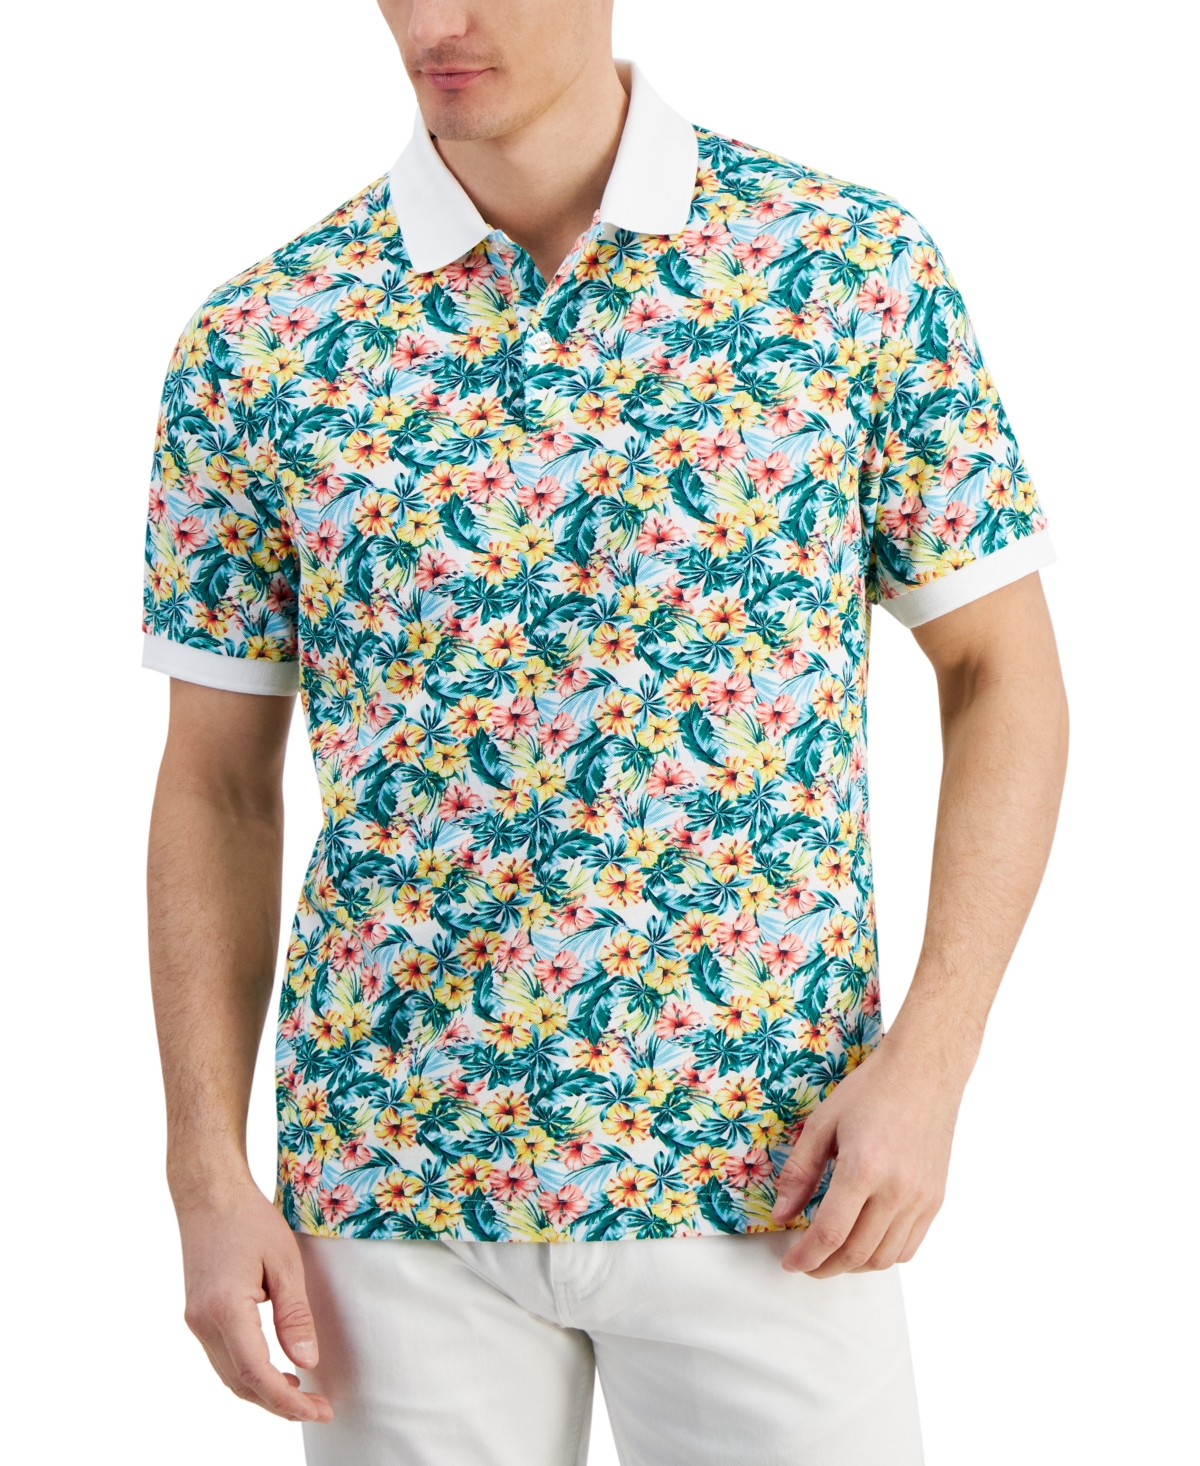 Men's Libra Textured Short Sleeve Floral Print Performance Polo Shirt, Created for Macy's - Bright White